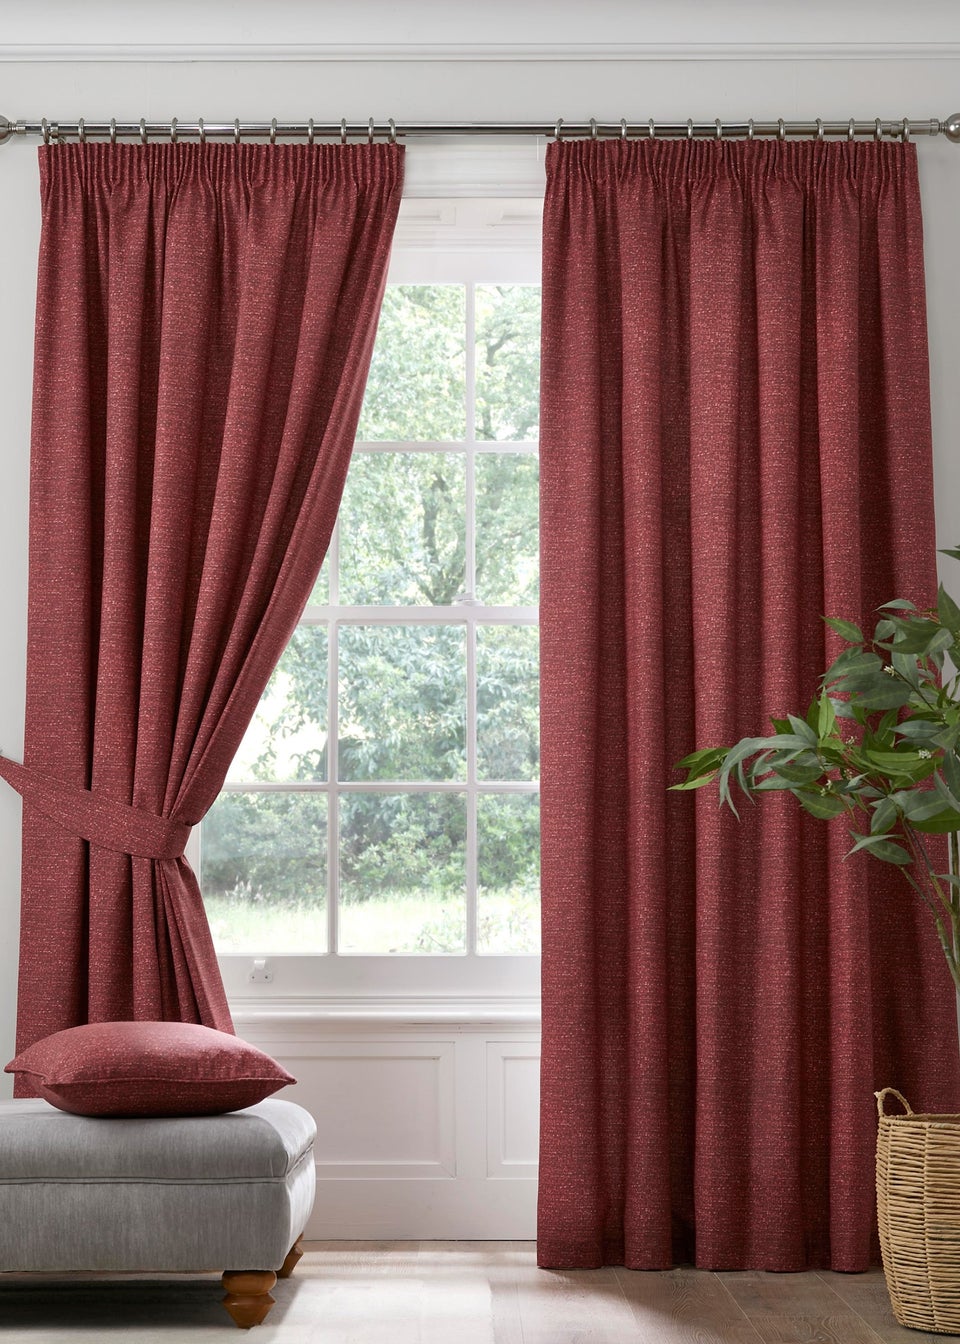 Dreams & Drapes Pembrey Brushed Cotton Red Pencil Pleat Curtains With Tie-Backs